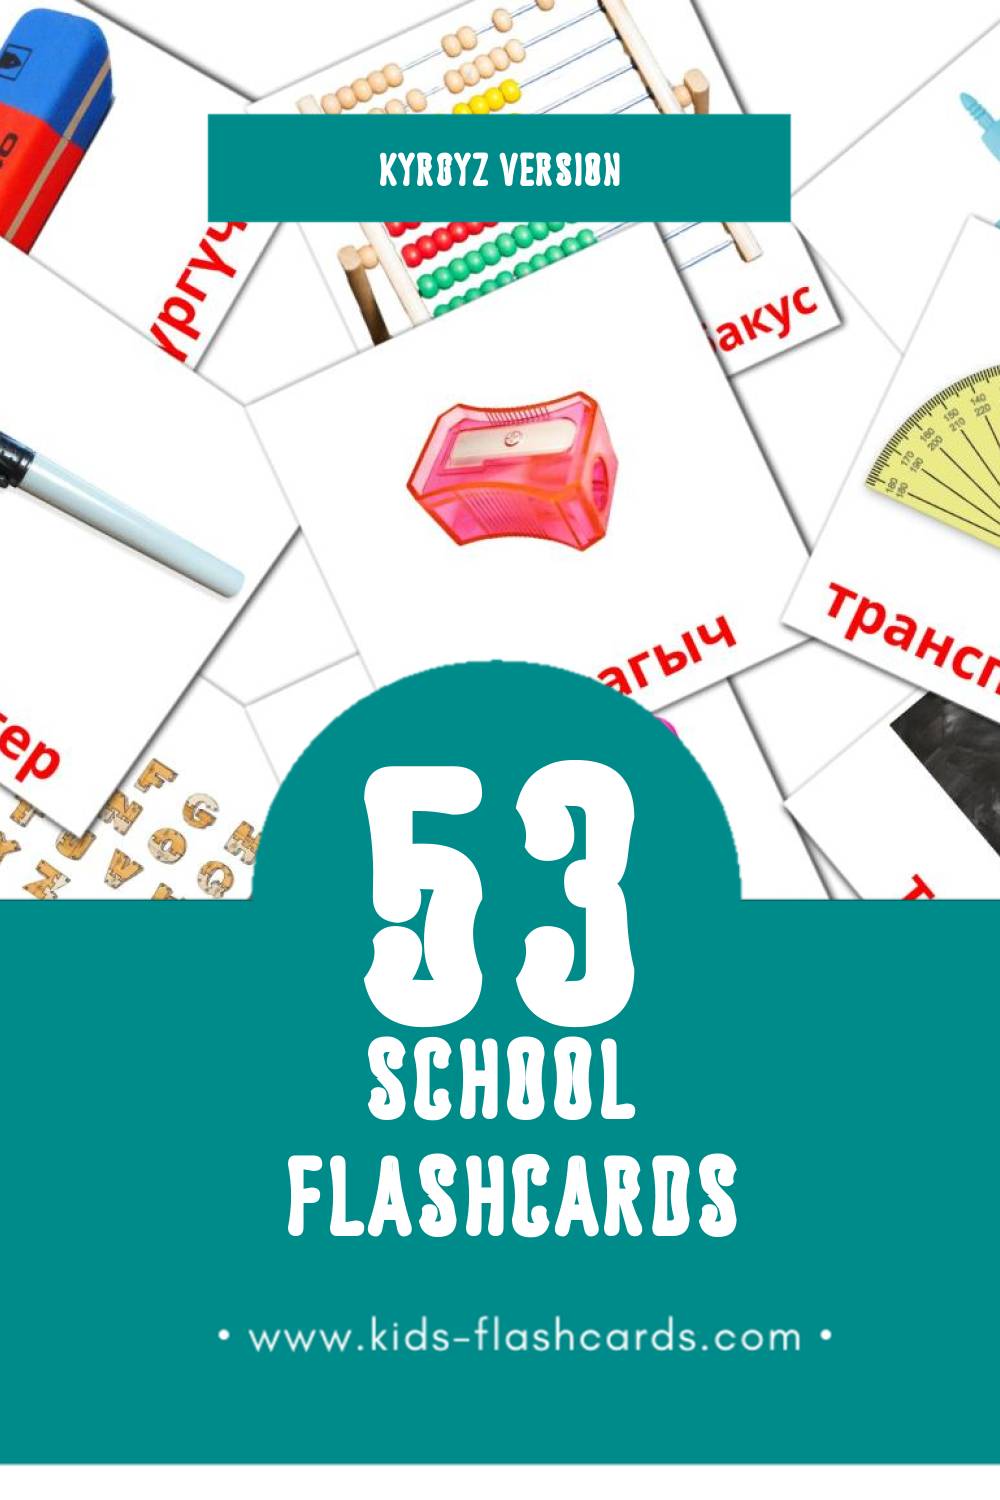 Visual Мектеп Flashcards for Toddlers (53 cards in Kyrgyz)